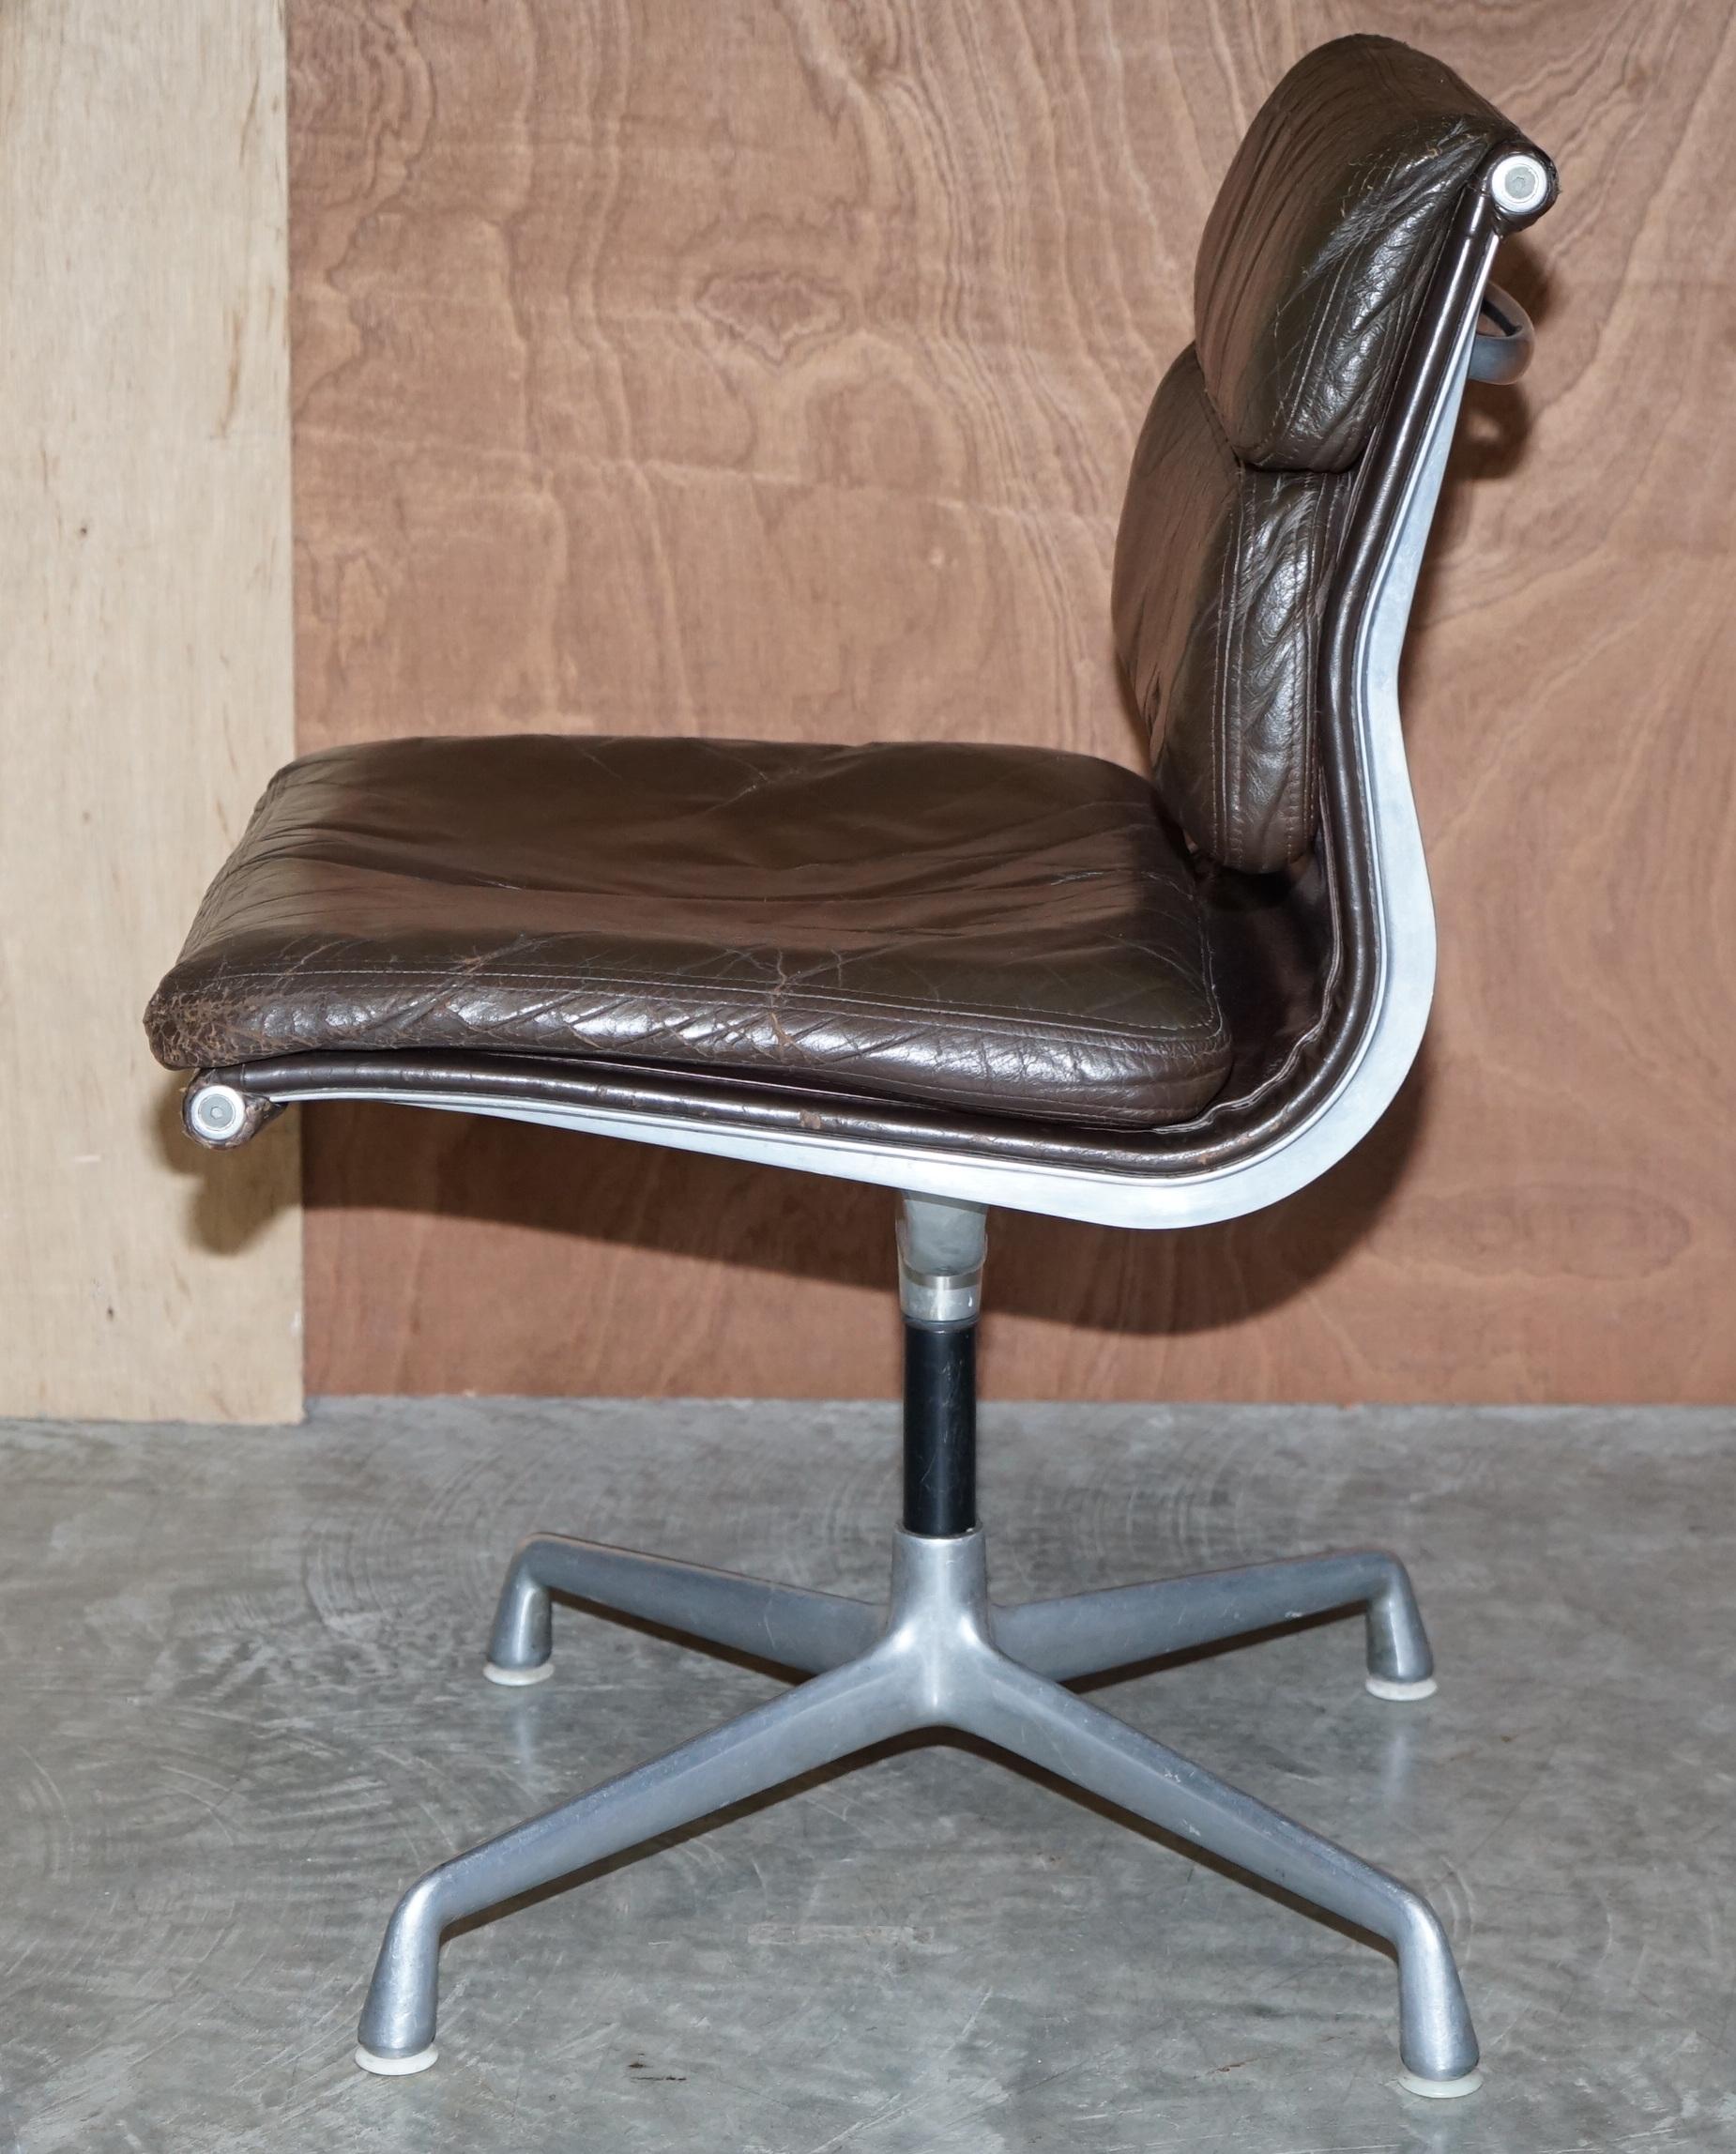 1970 Vitra Eames Herman Miller EA 205 Brown Leather Soft Pad Swivel Office Chair 10